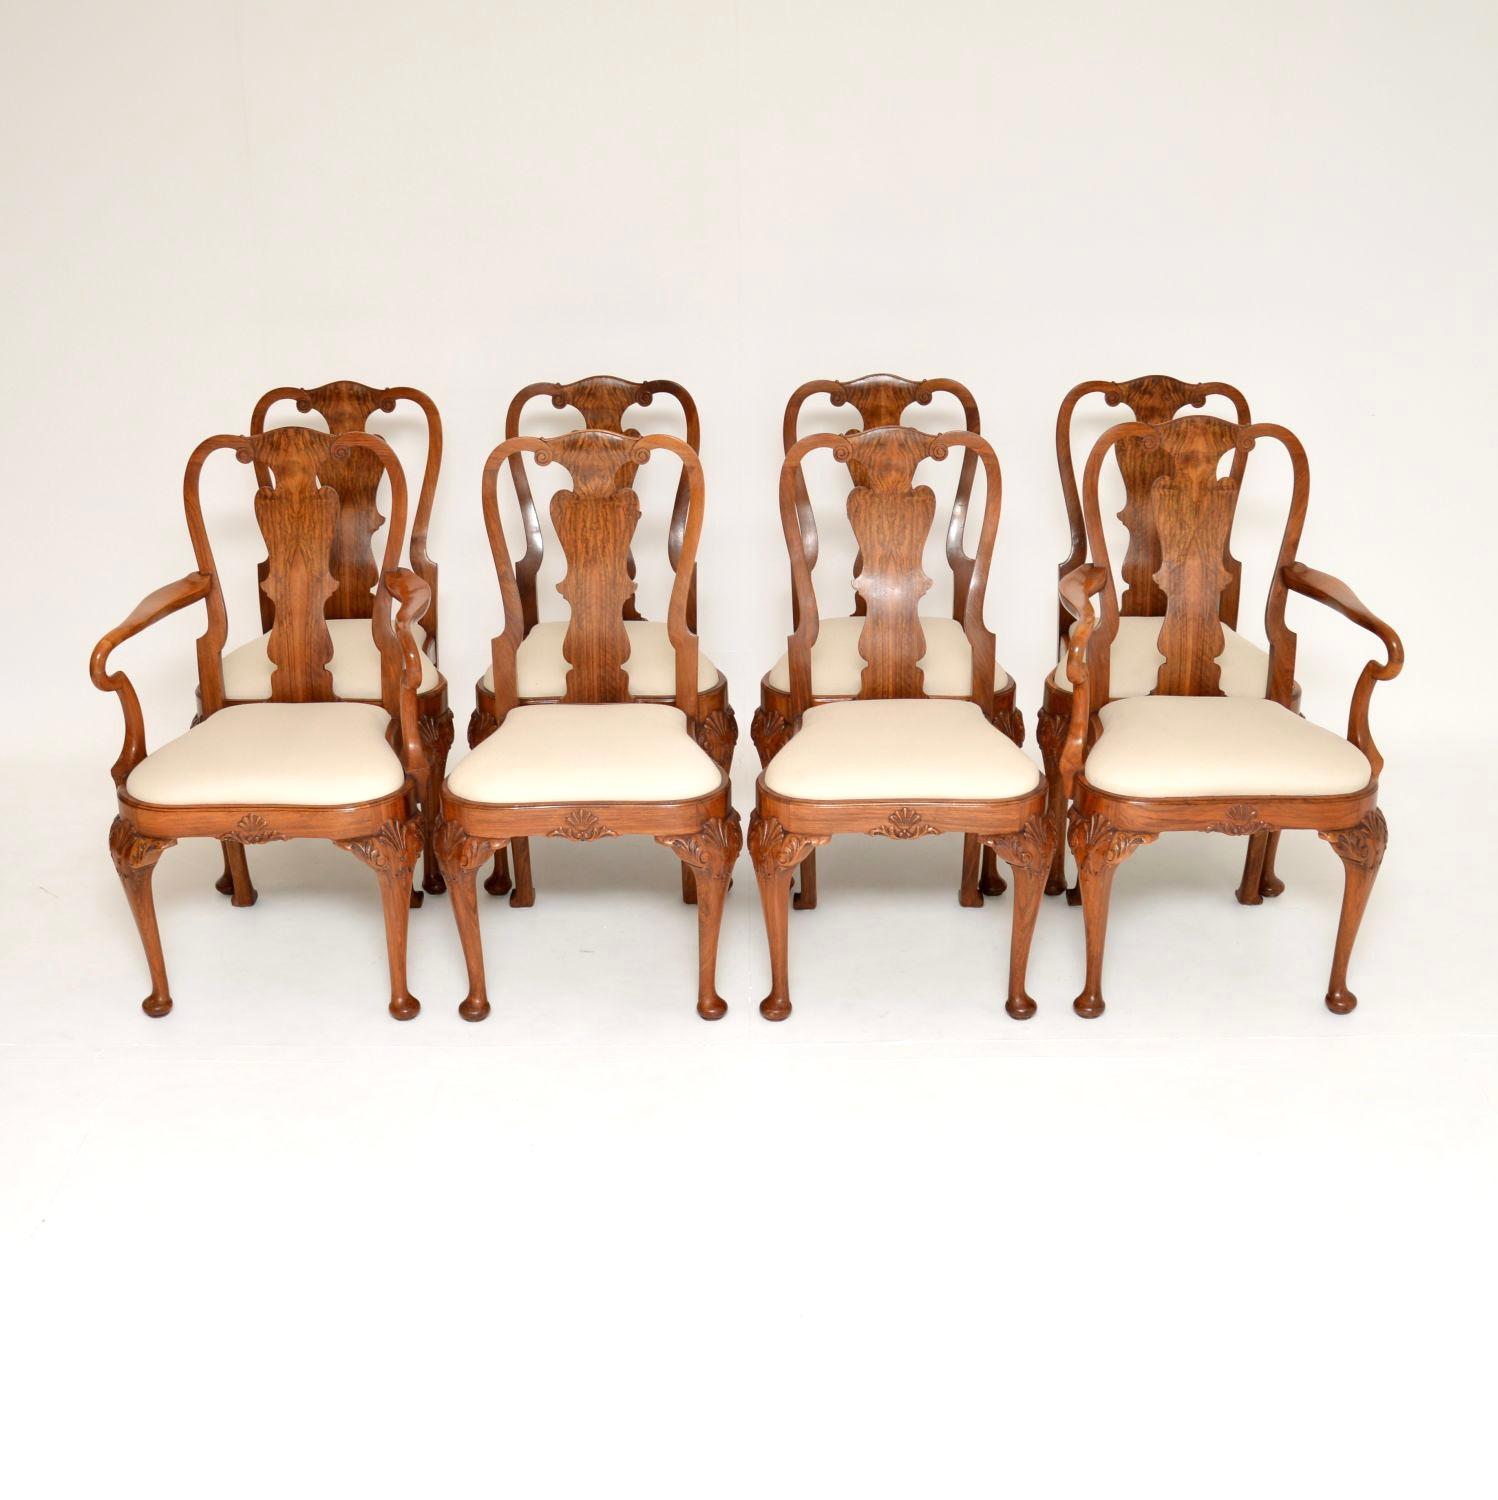 An absolutely stunning set of eight antique walnut dining chairs in the Queen Anne style. These were made in England, they date from around the 1920-30’s.

The quality is superb, these have an absolutely gorgeous design and look amazing from all